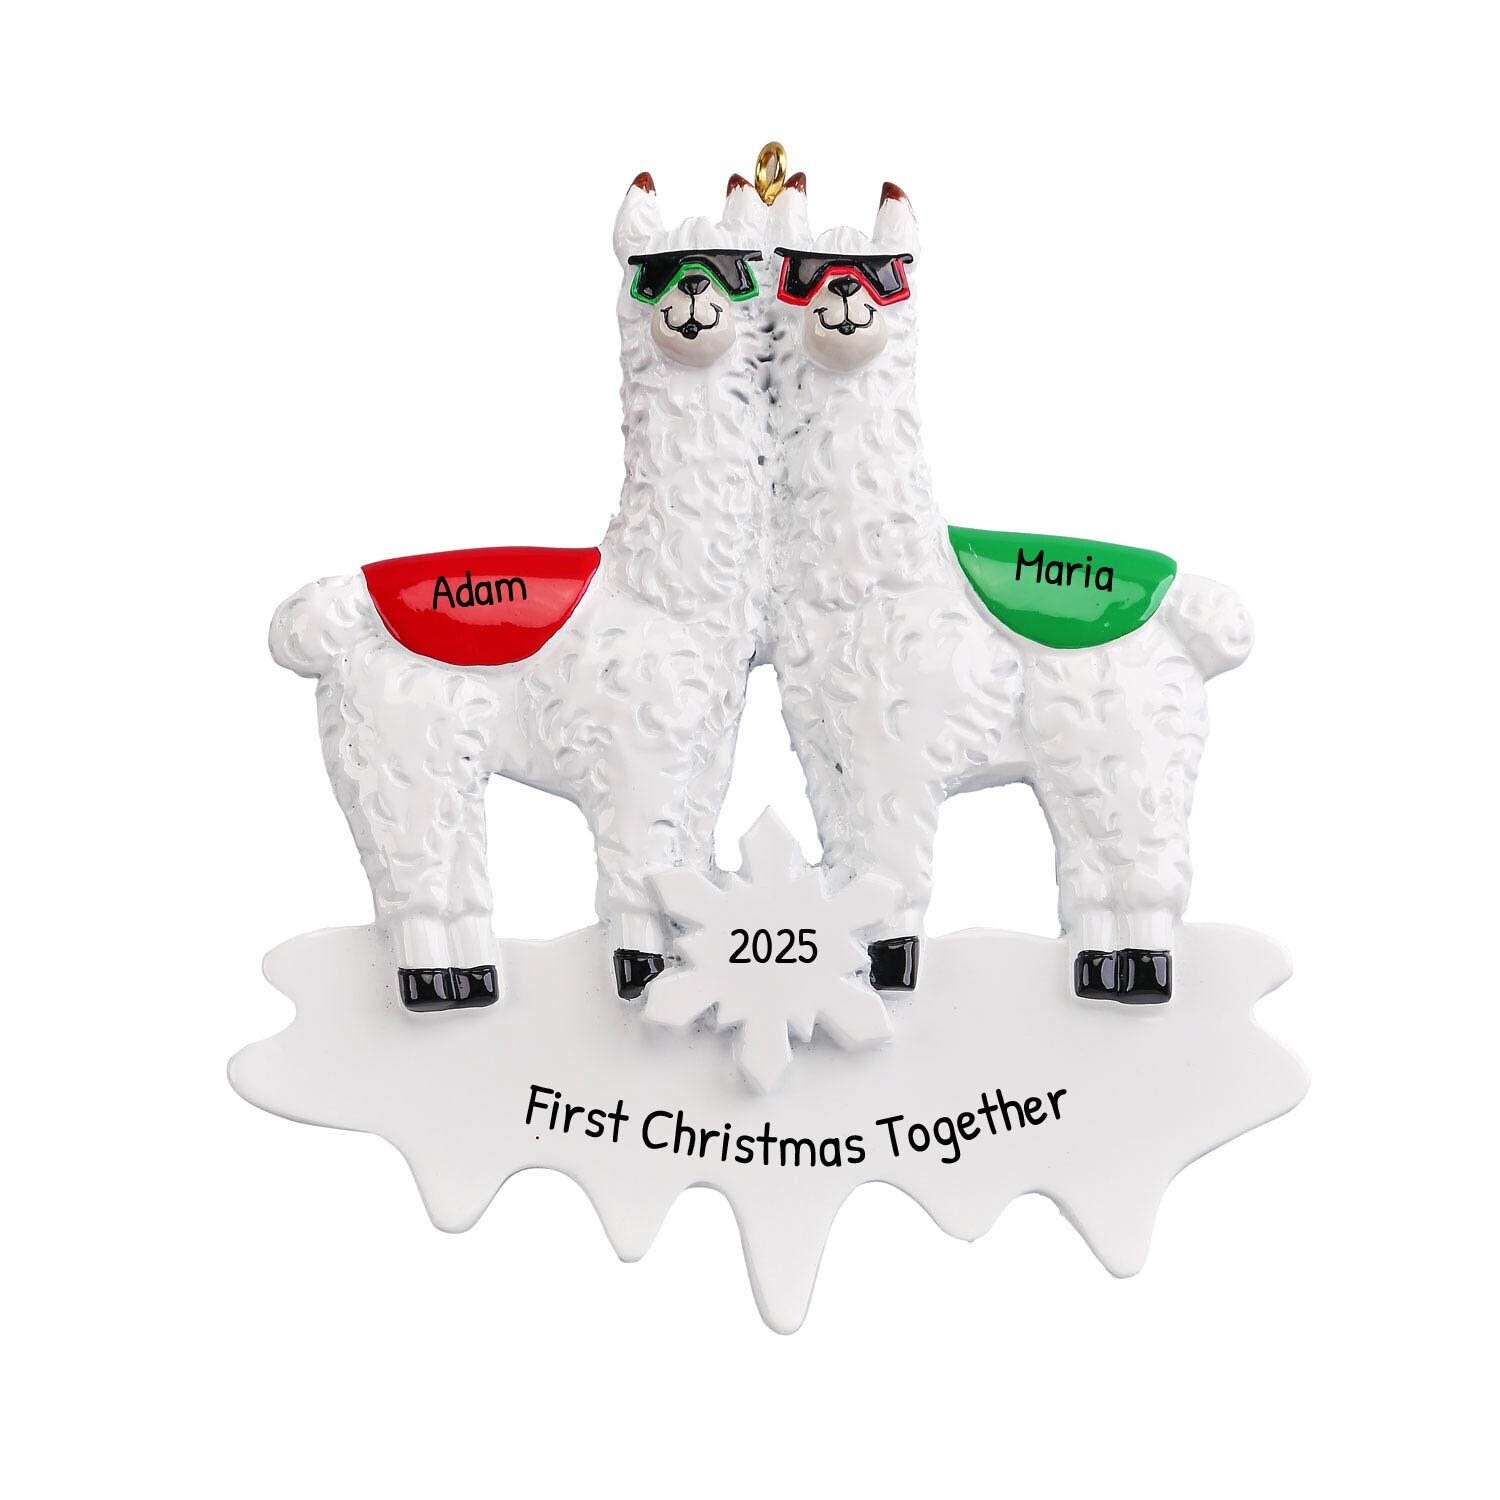 Personalized First Christmas Together Ornament 2023 - Cool Llama Couples Christmas Ornament 2023 - Free Customization with Gift Box